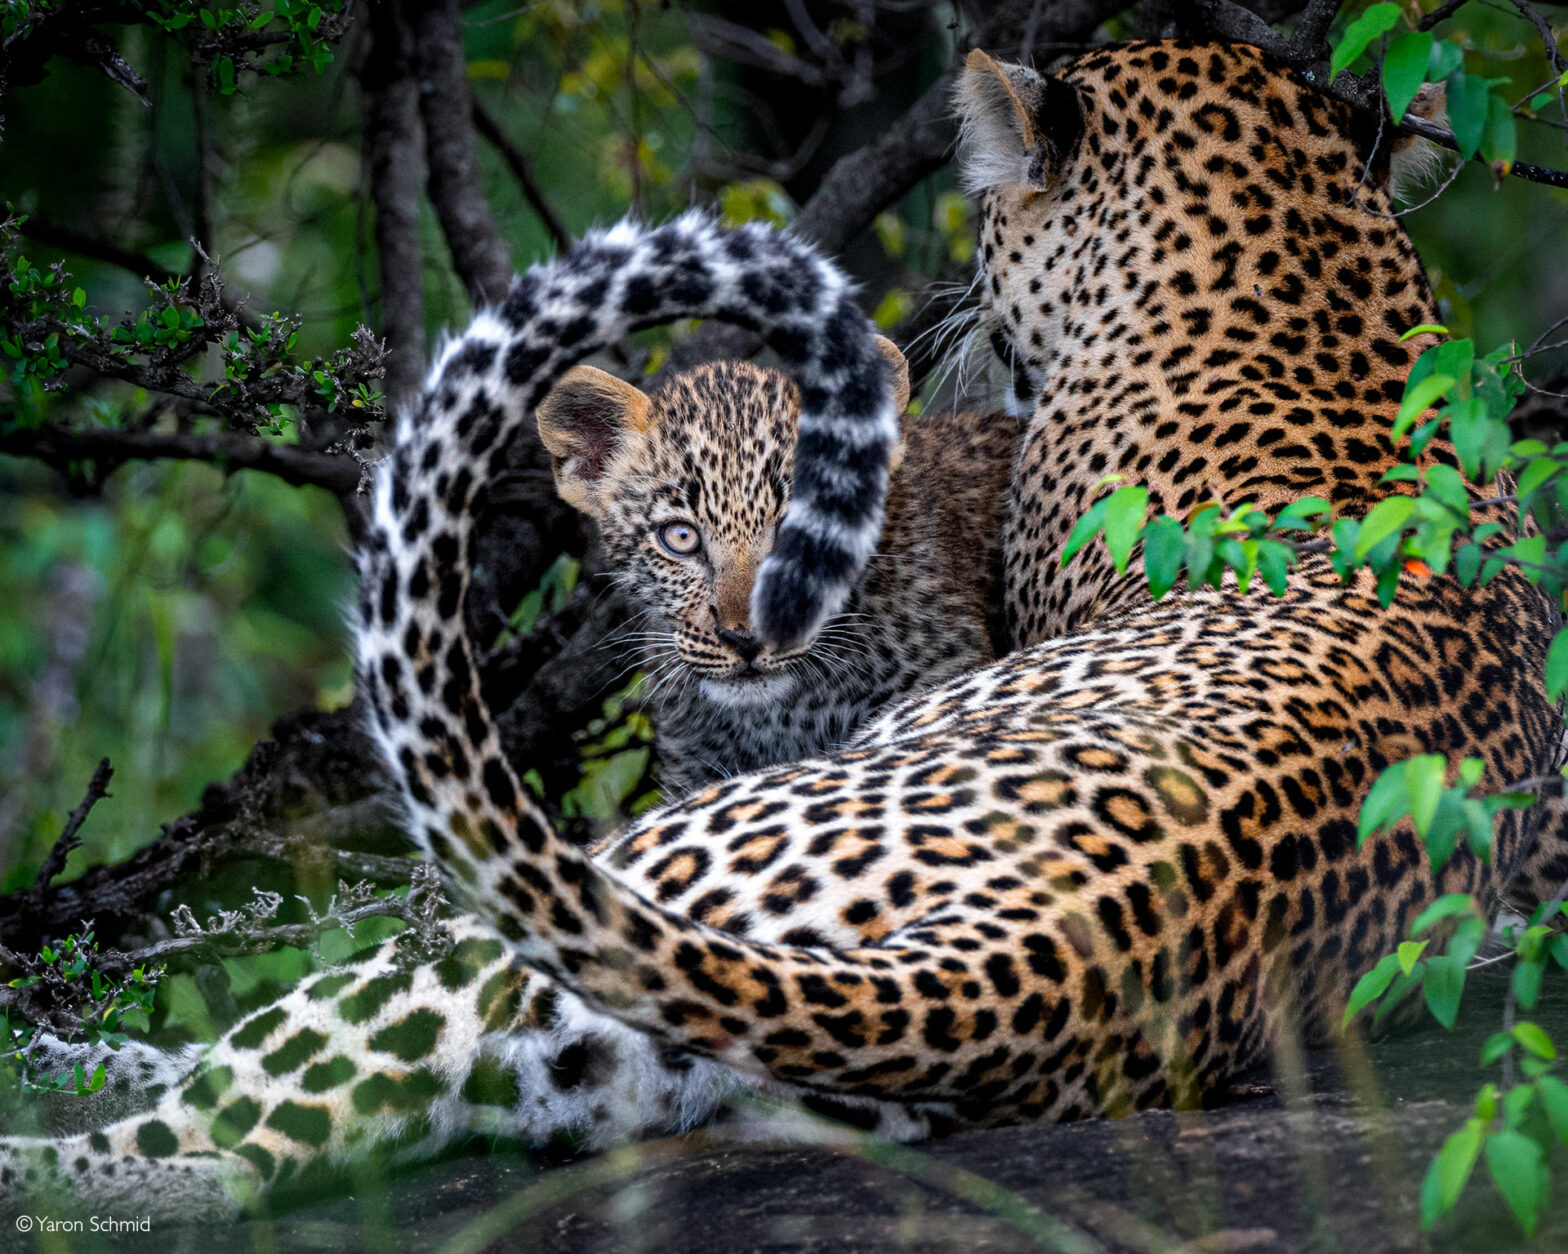 https://africageographic.com/wp-content/uploads/2024/01/Yaron-Schmid-Leopard-cub-framed-by-its-mother-Maasai-Mara-National-Reserve-Kenya-cover-with-watermark-1568x1254.jpg